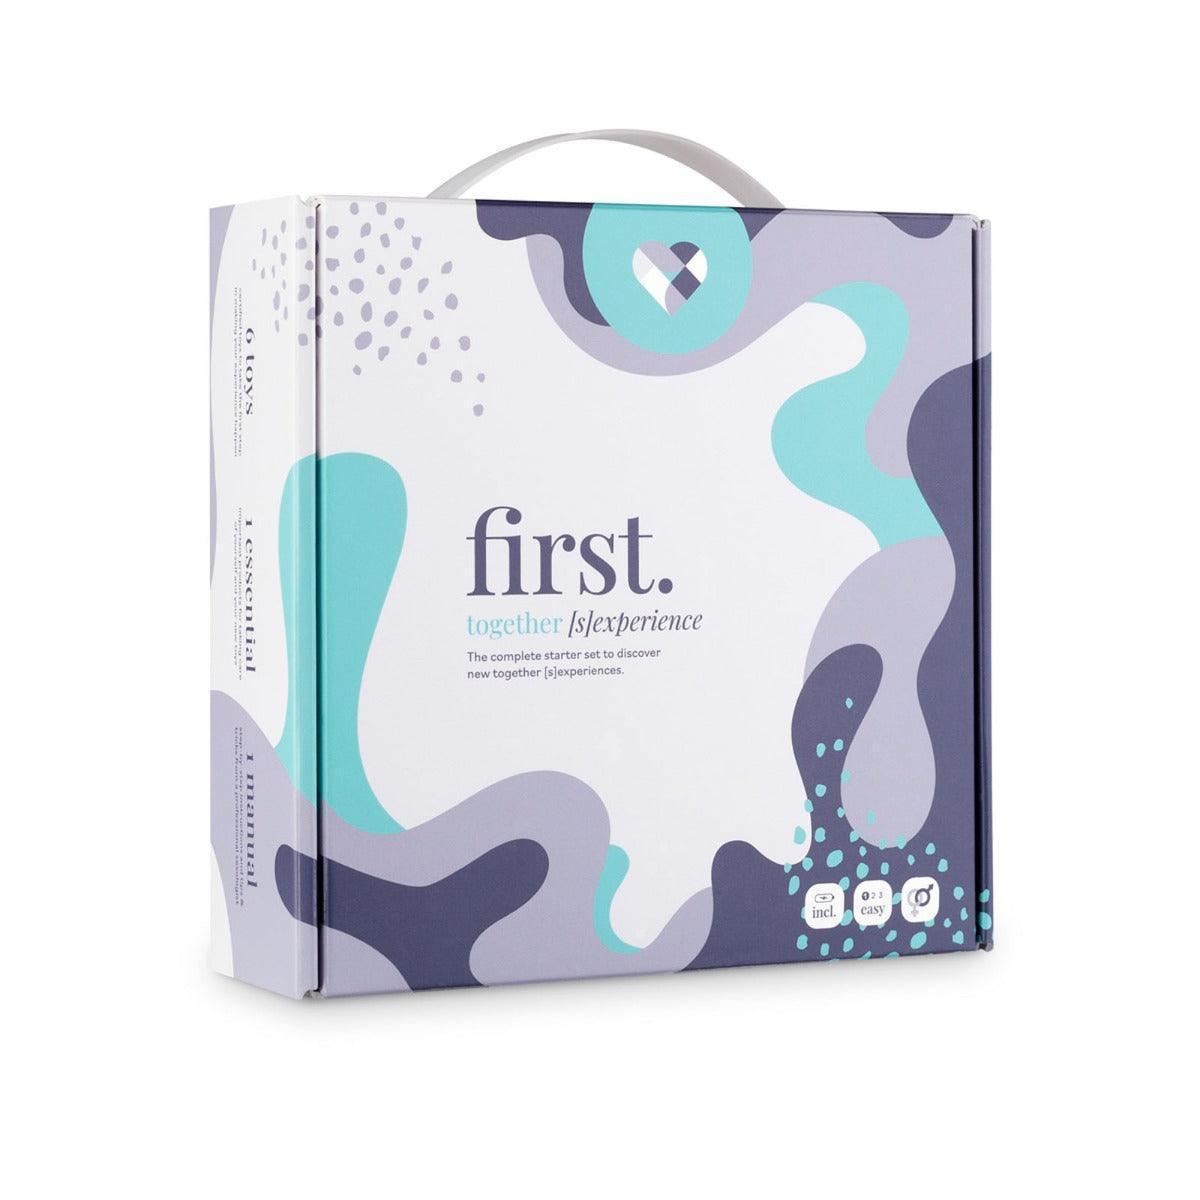 Loveboxxx First. Together [S]Experience Couples Sex Toy Starter Set